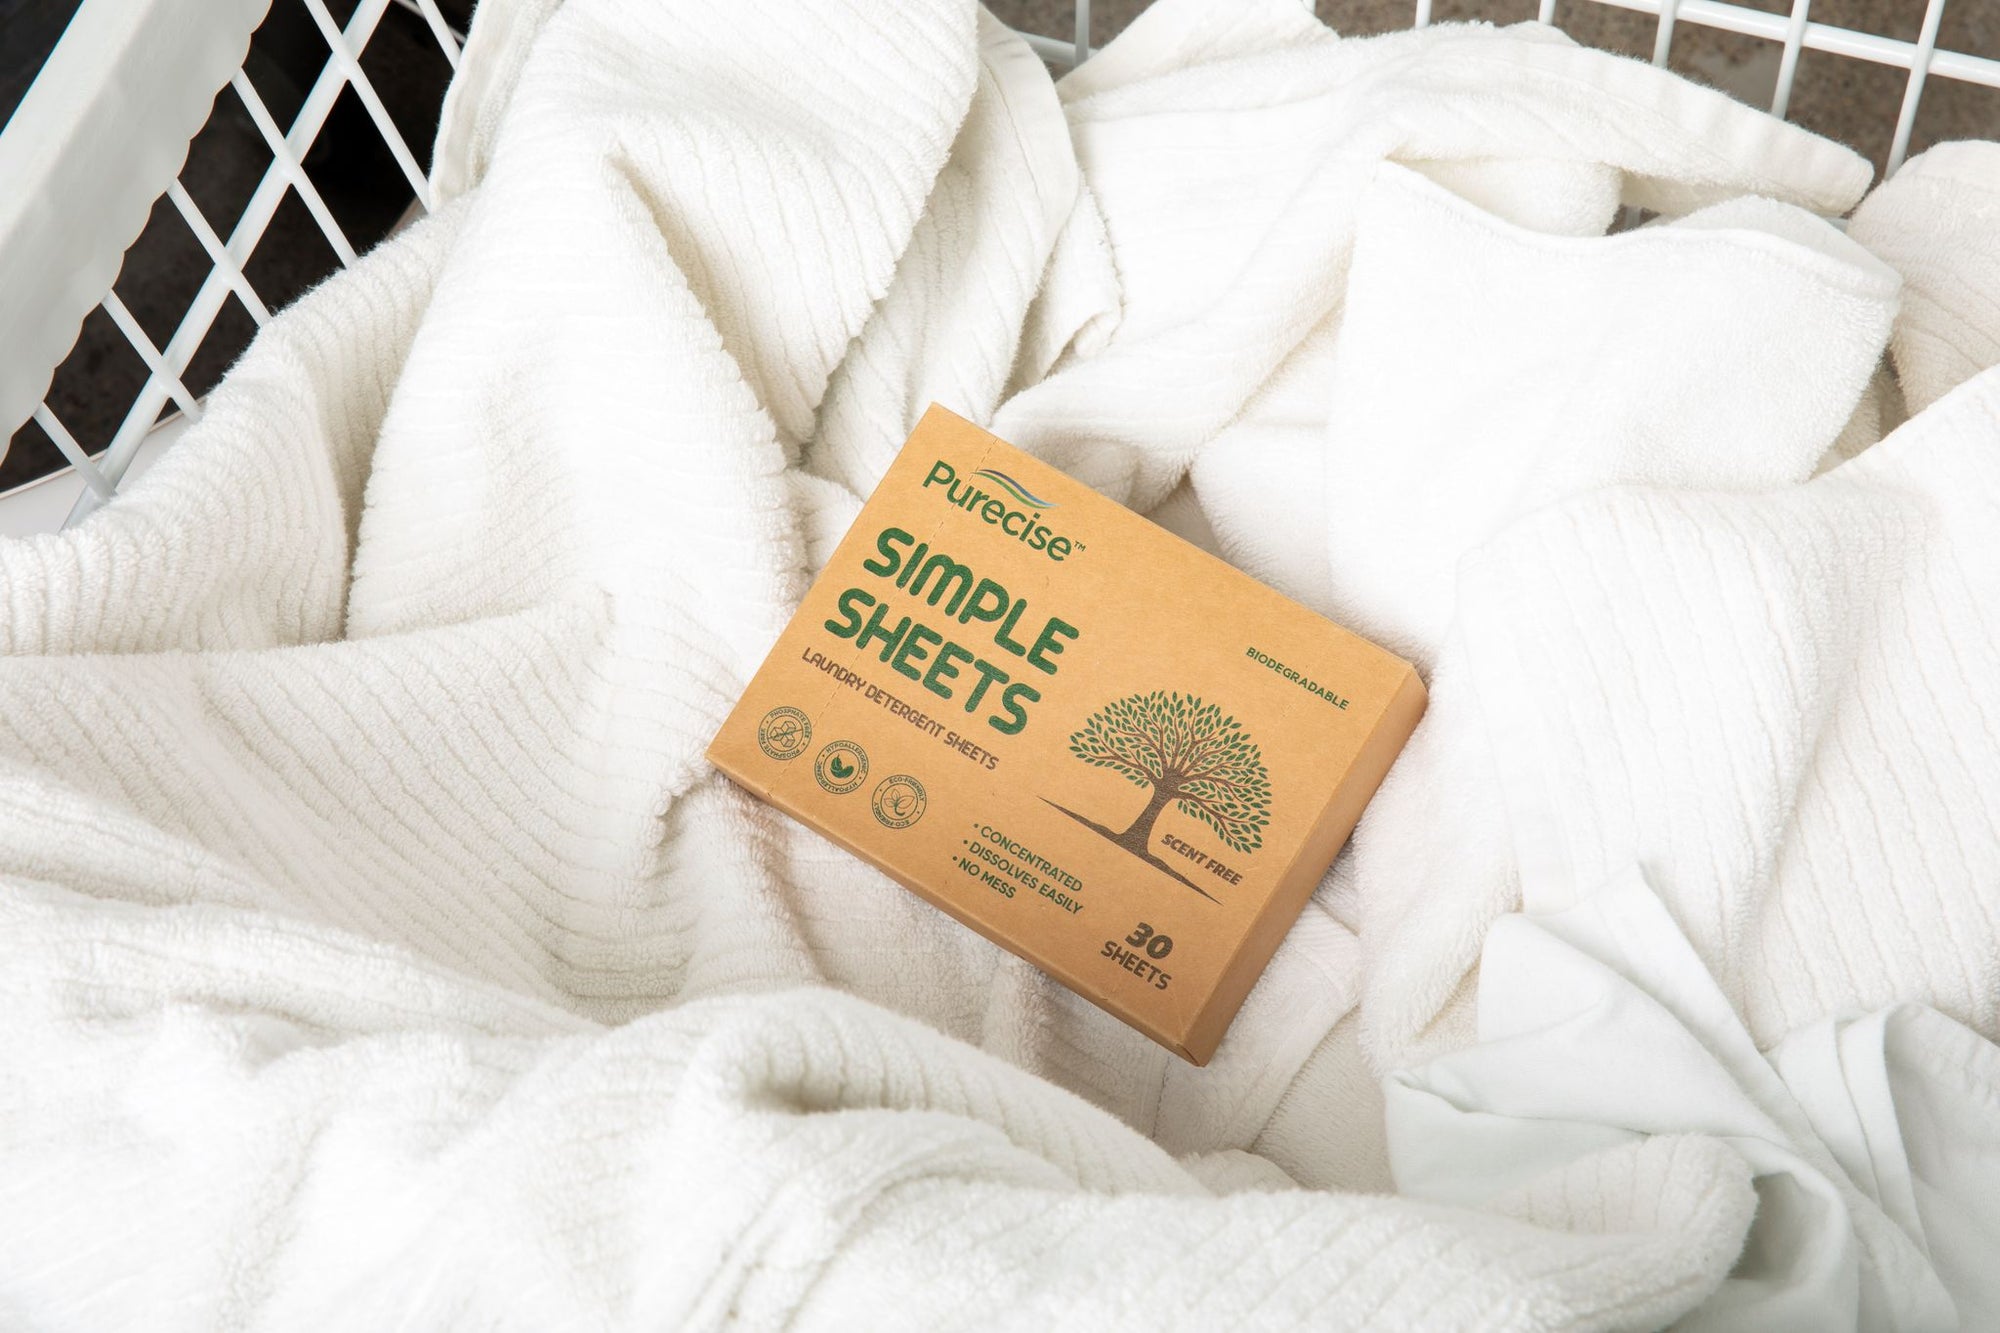 Purecise Laundry Detergent Sheets